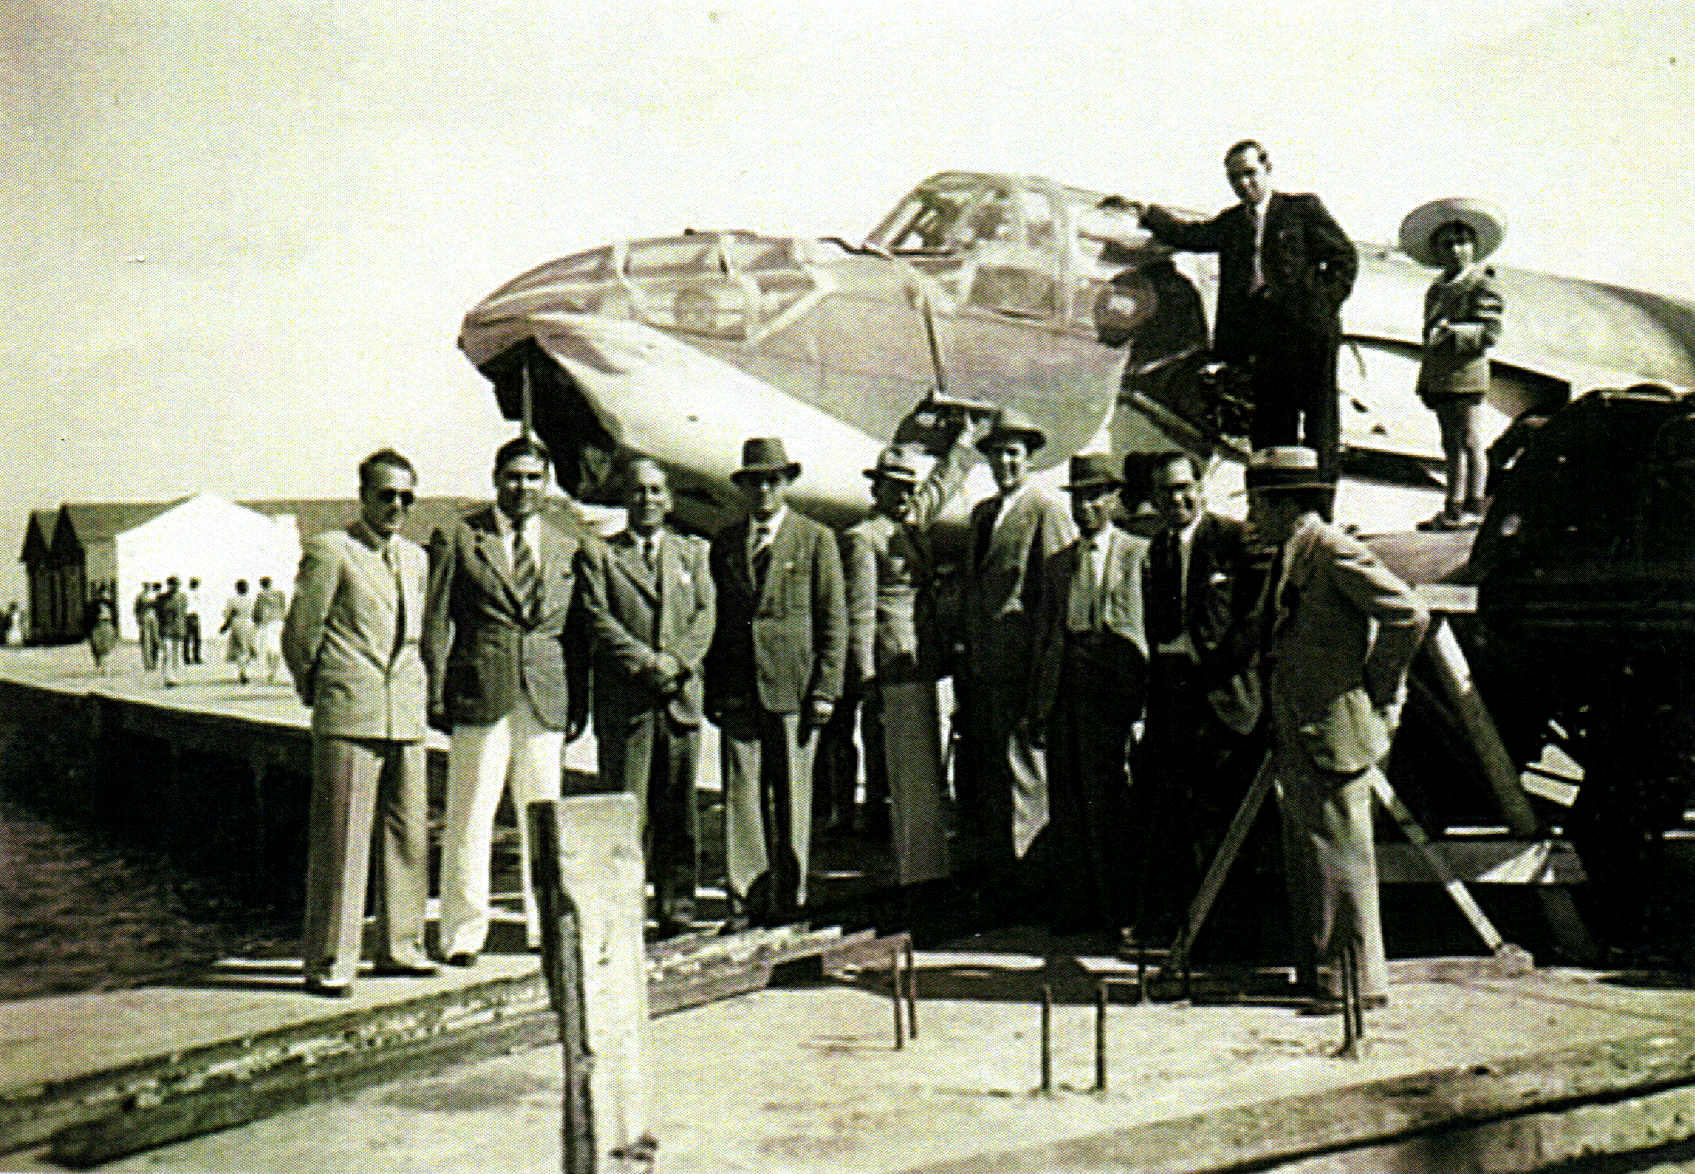 The plane became one attraction for the population of the islands and the surrounding area